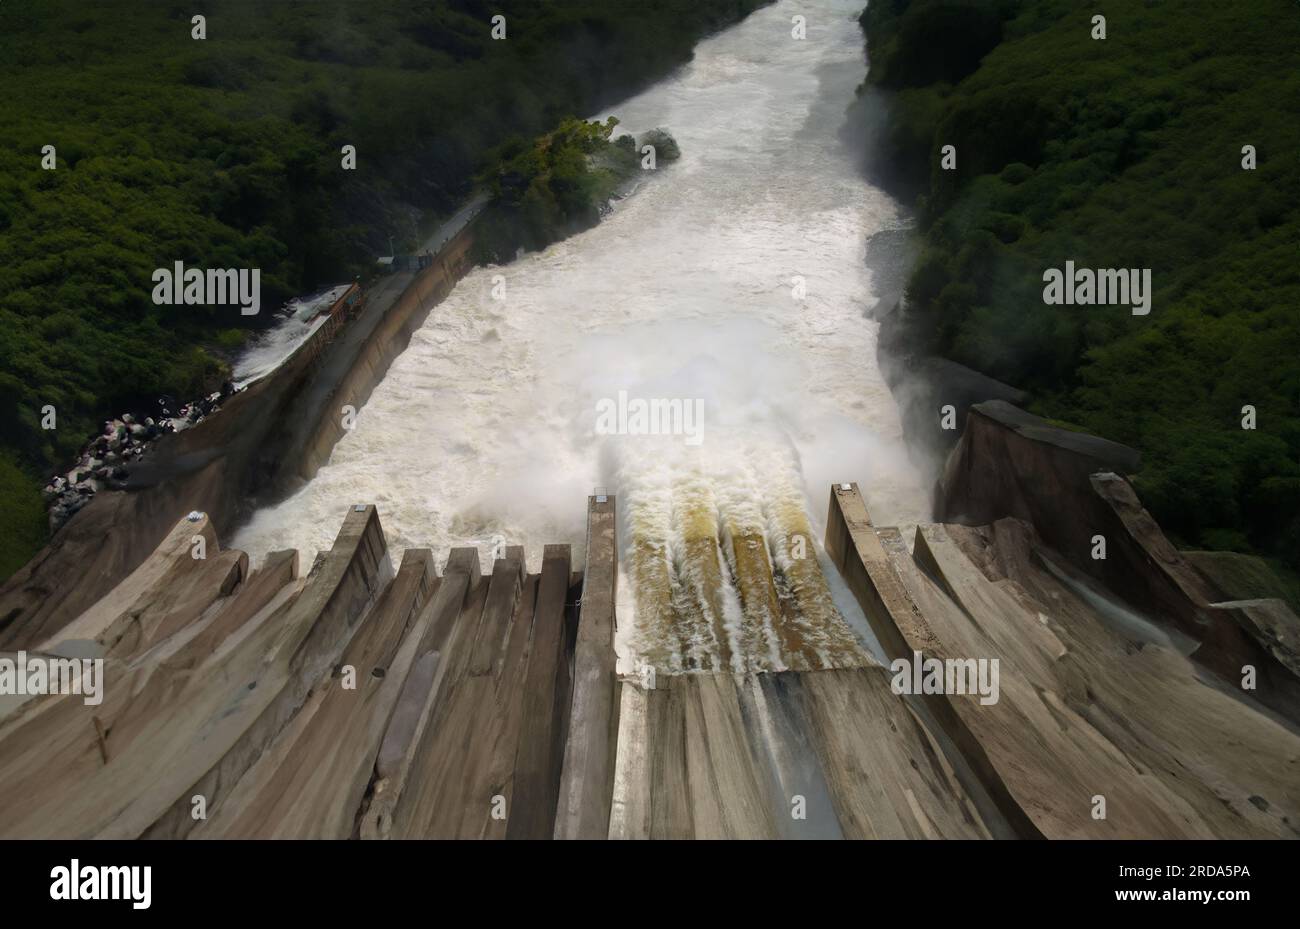 Water cascading over an old dam in nature. Stock Photo